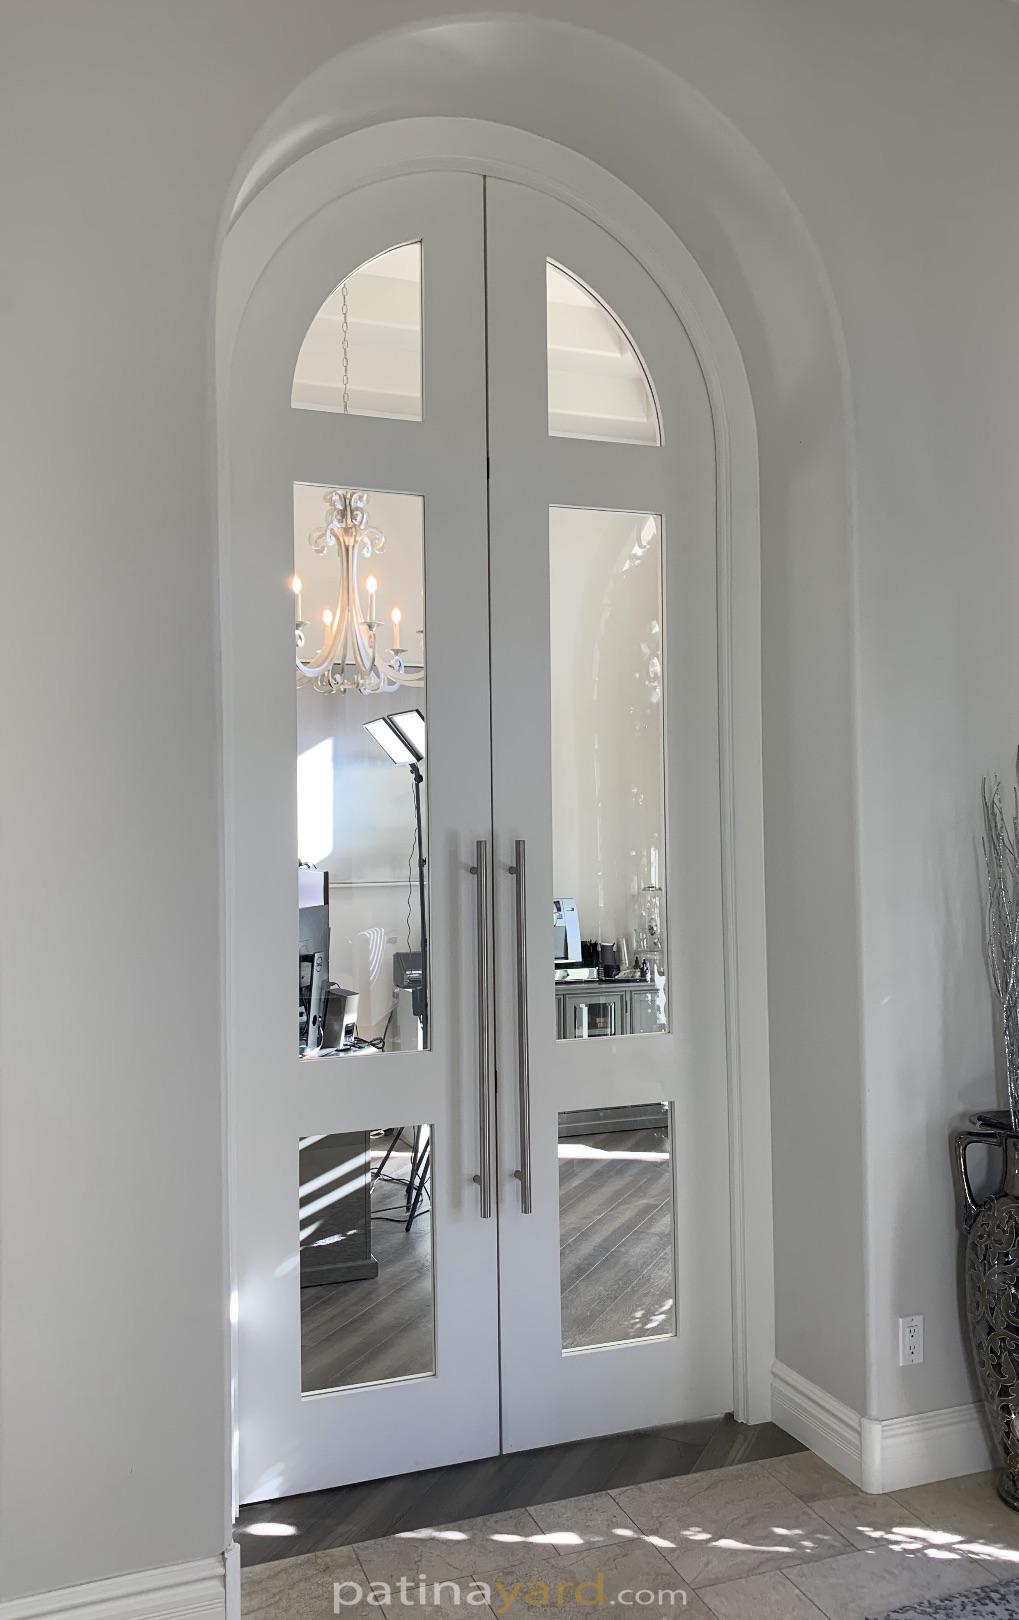 Large arched double painted doors with clear glass